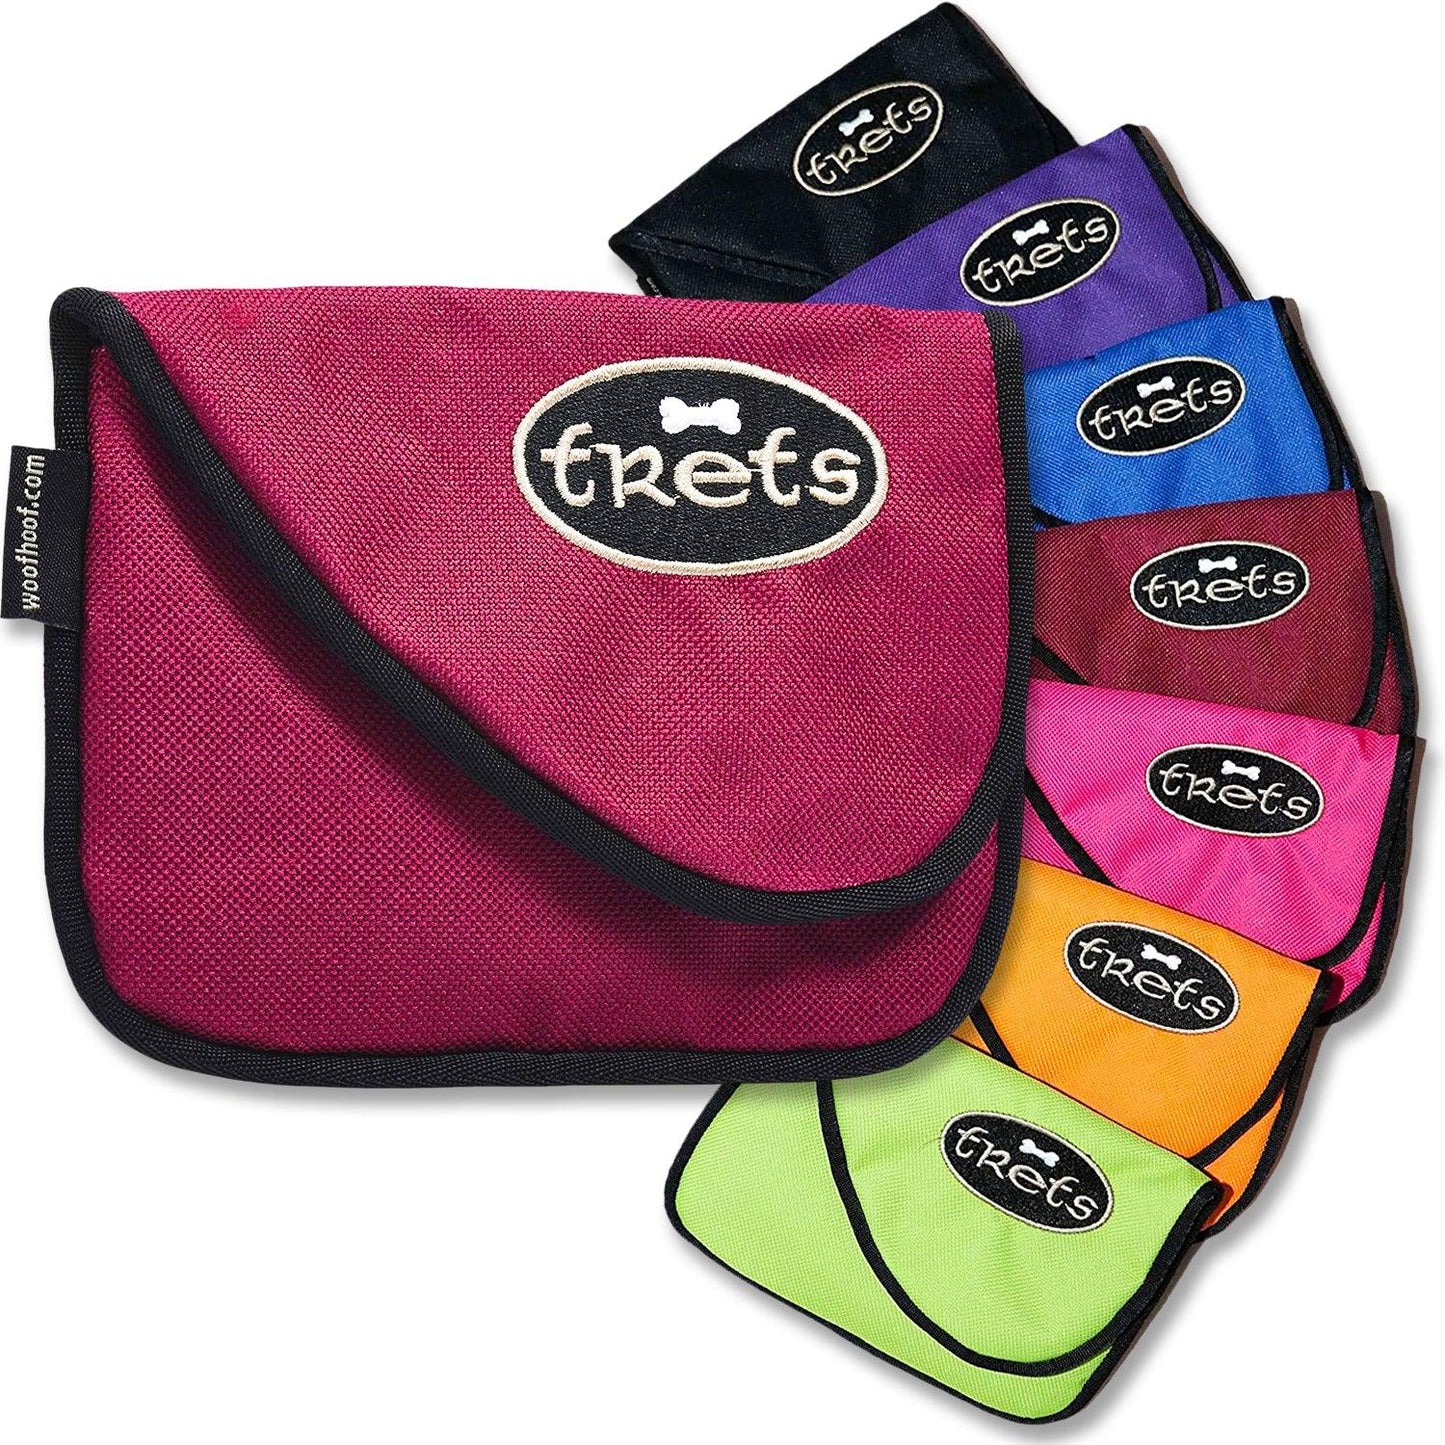 Burgundy dog treat pouch shown with multiple color options